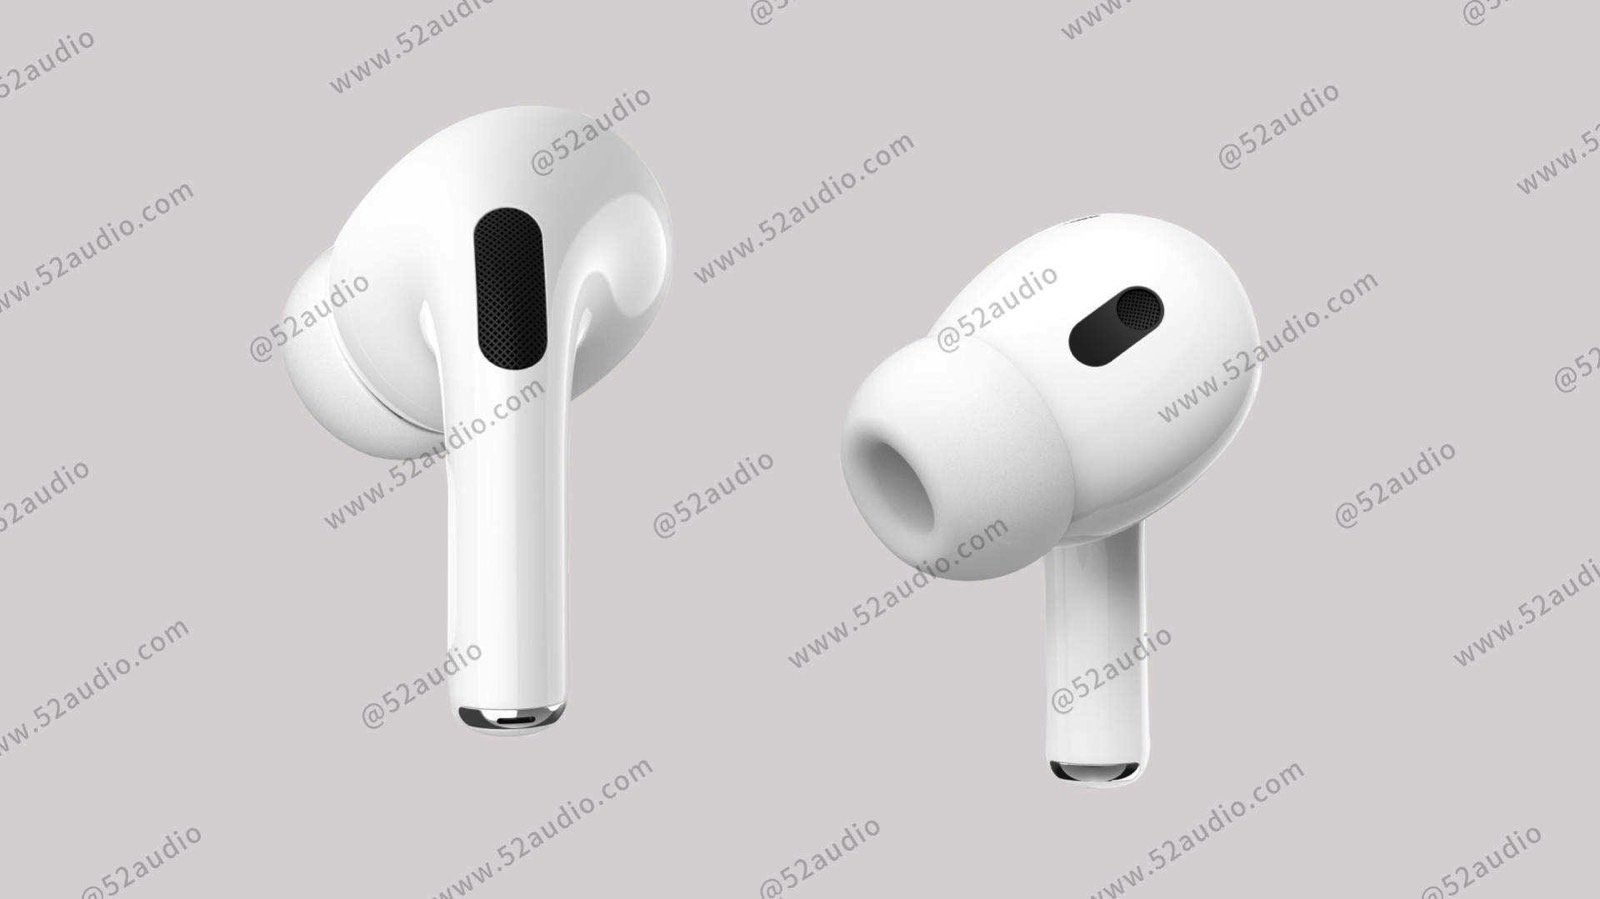 AirPods Pro 2 earbuds design render.